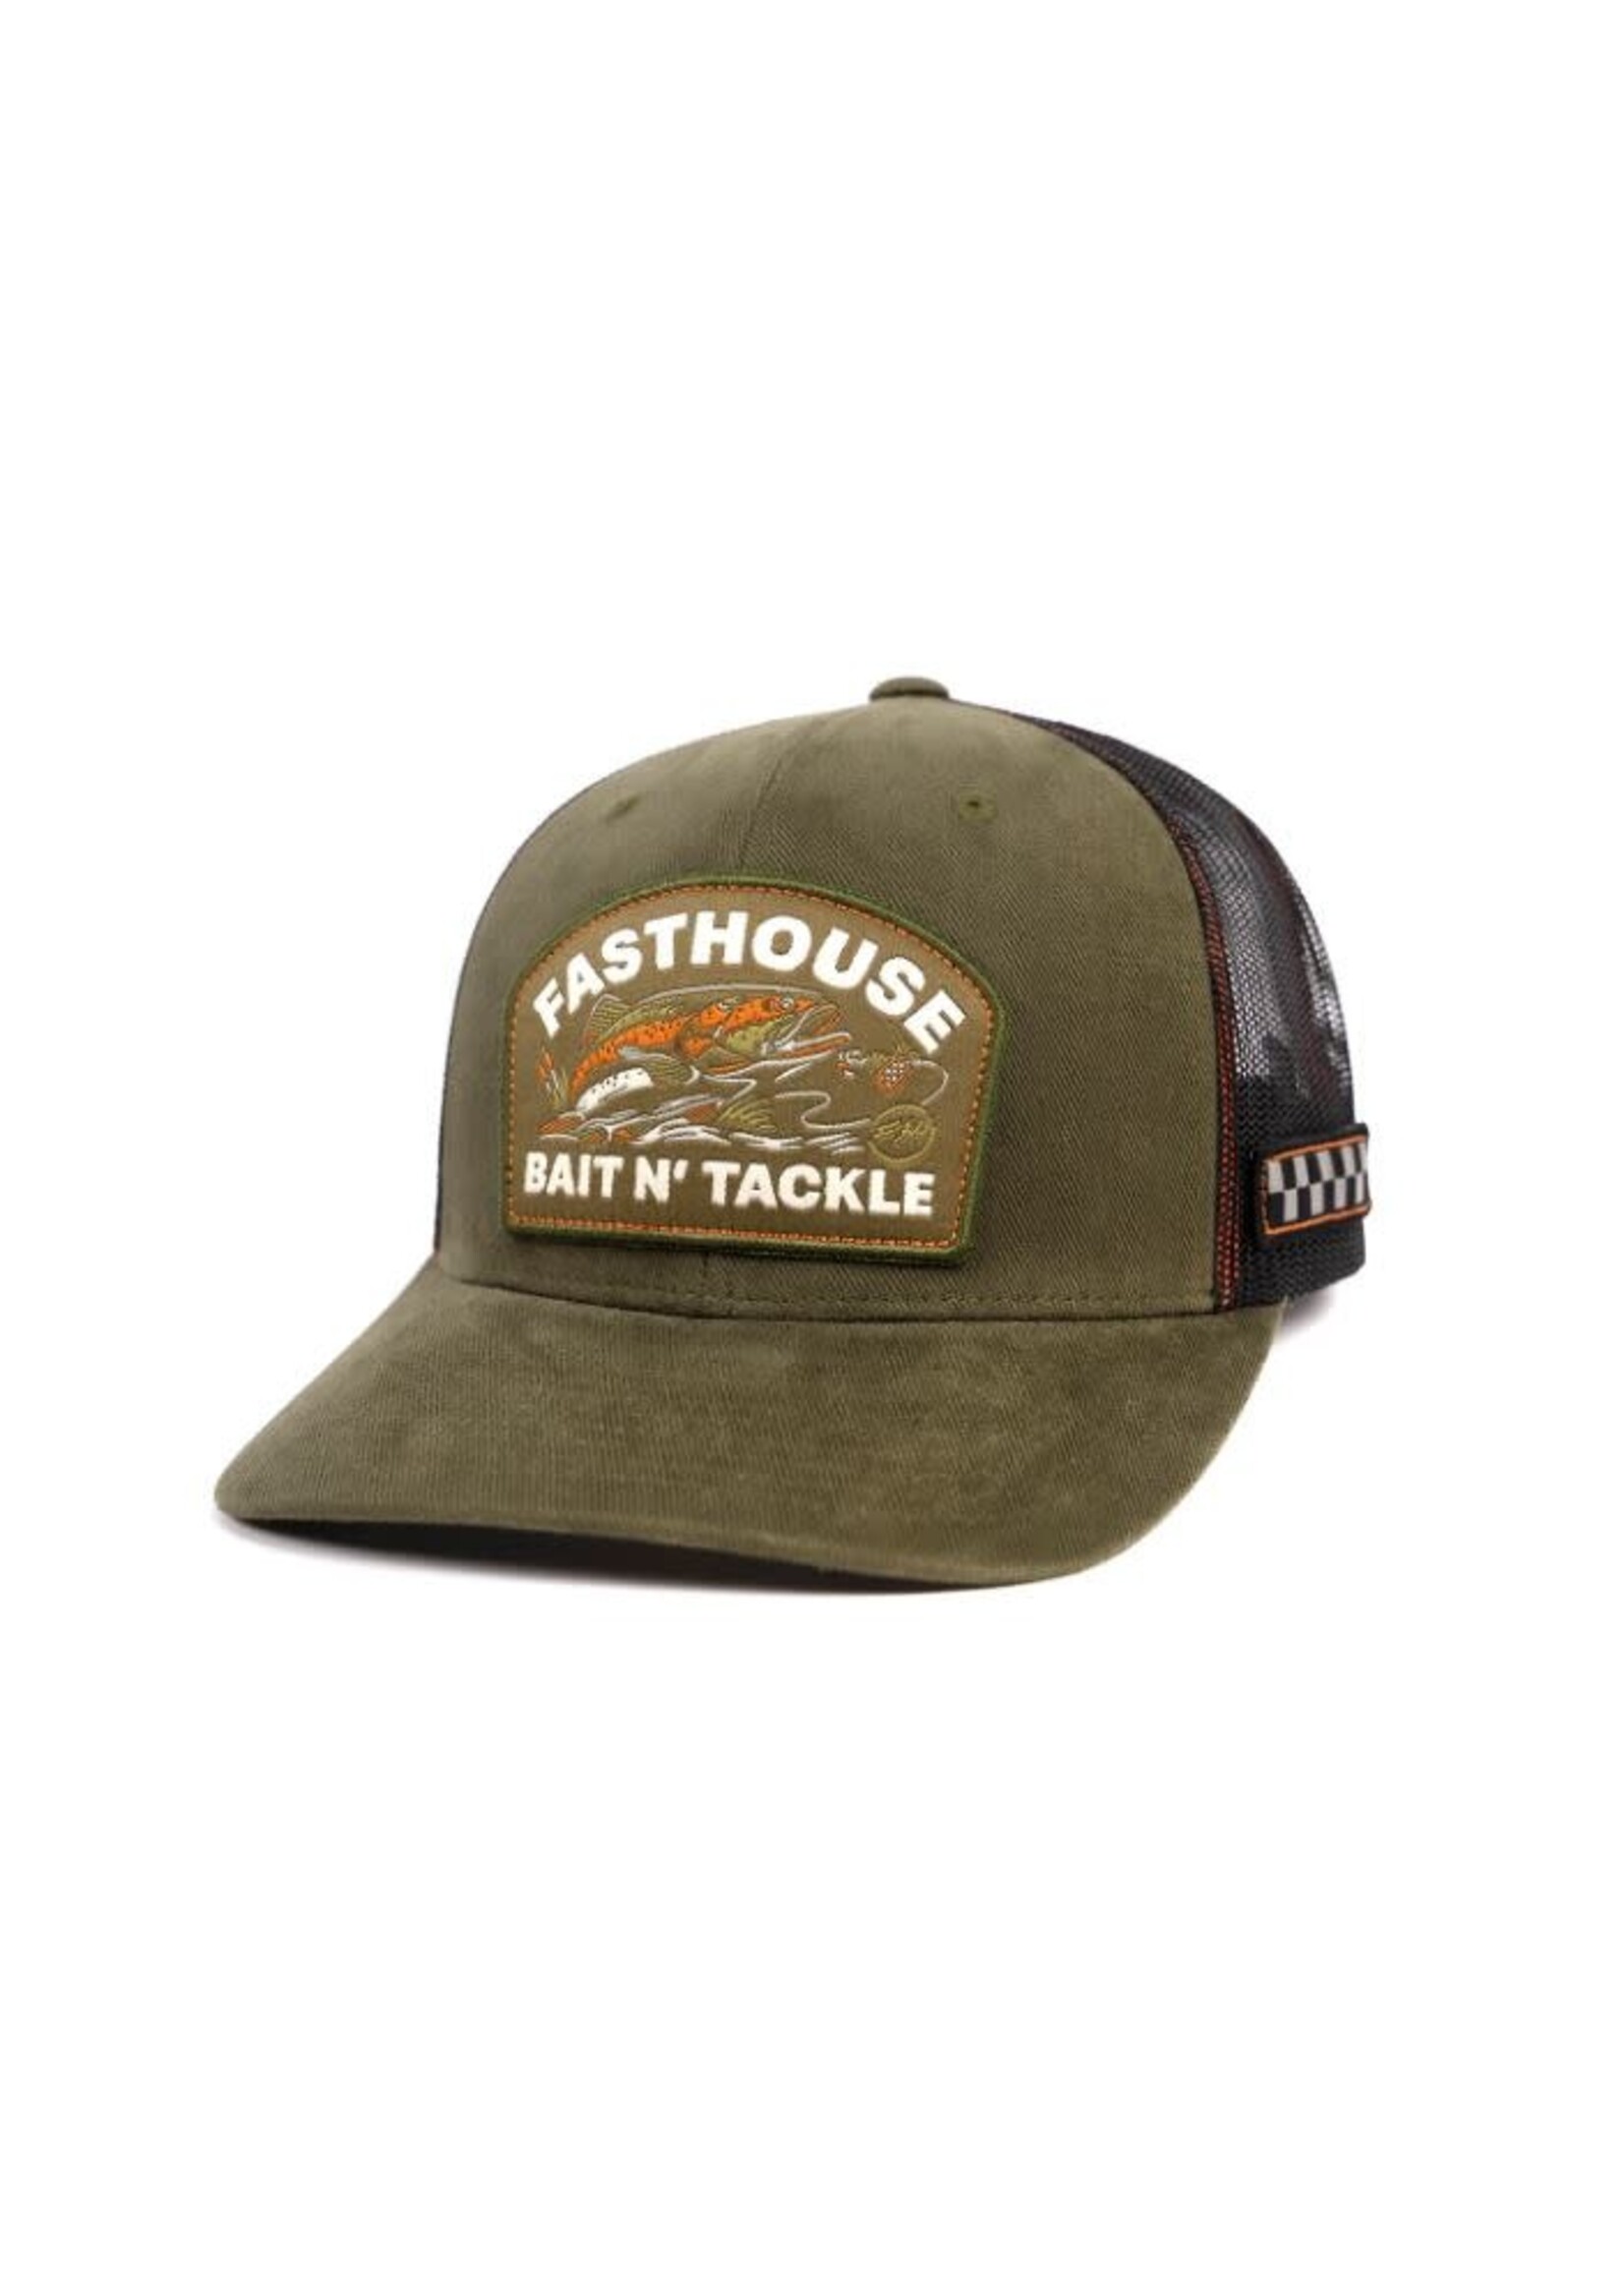 FASTHOUSE- Bait Hat